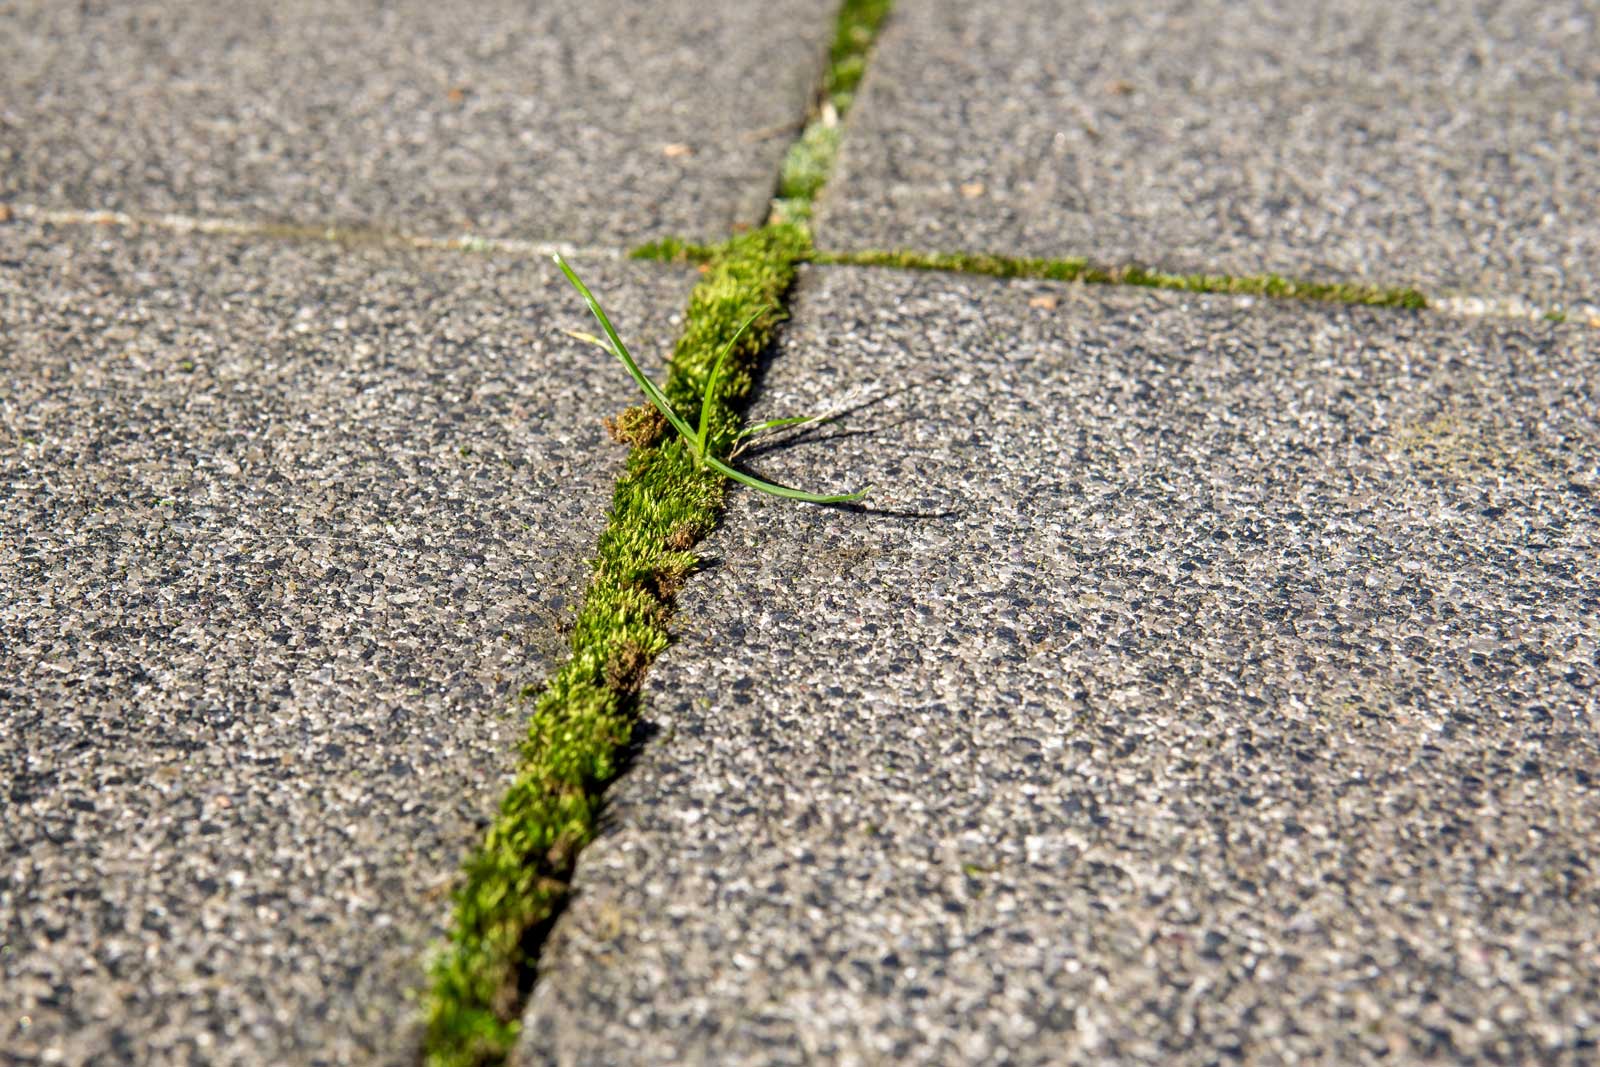 How To Remove Grass From The Sidewalk